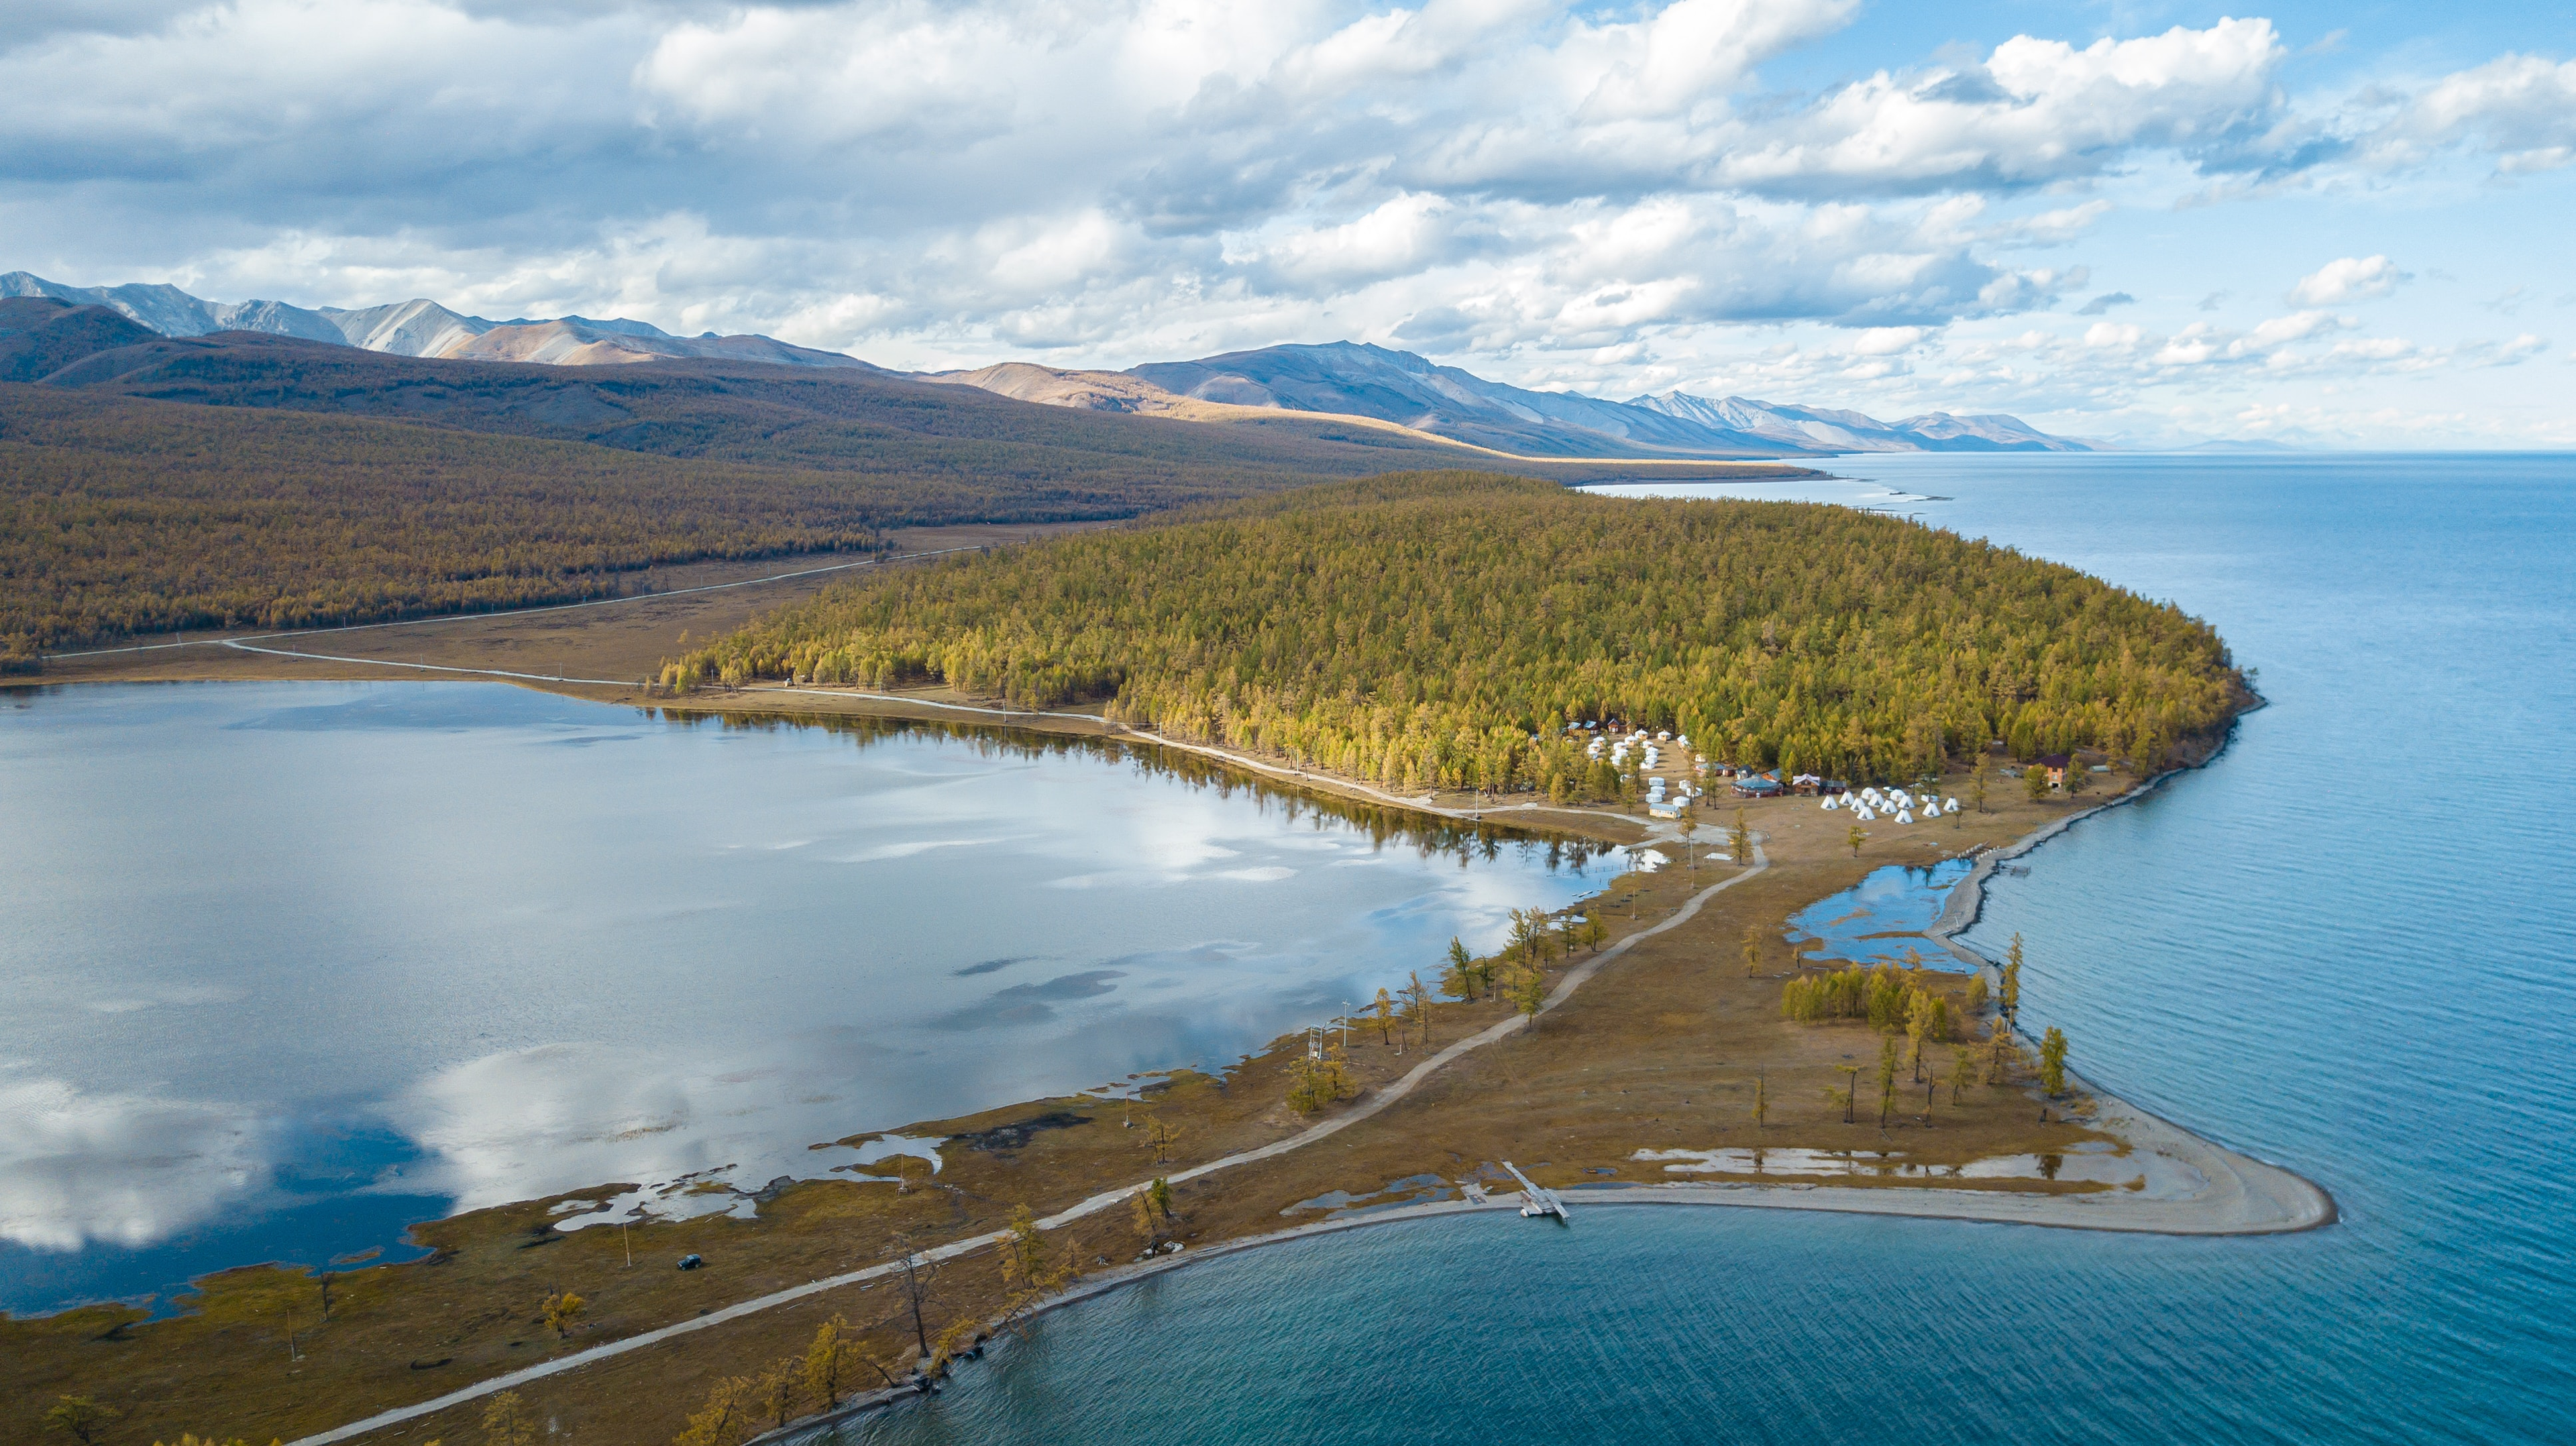 Stay like a nomad on the shores of the Khuvsgul Lake in the beautiful Tolgoit Camp